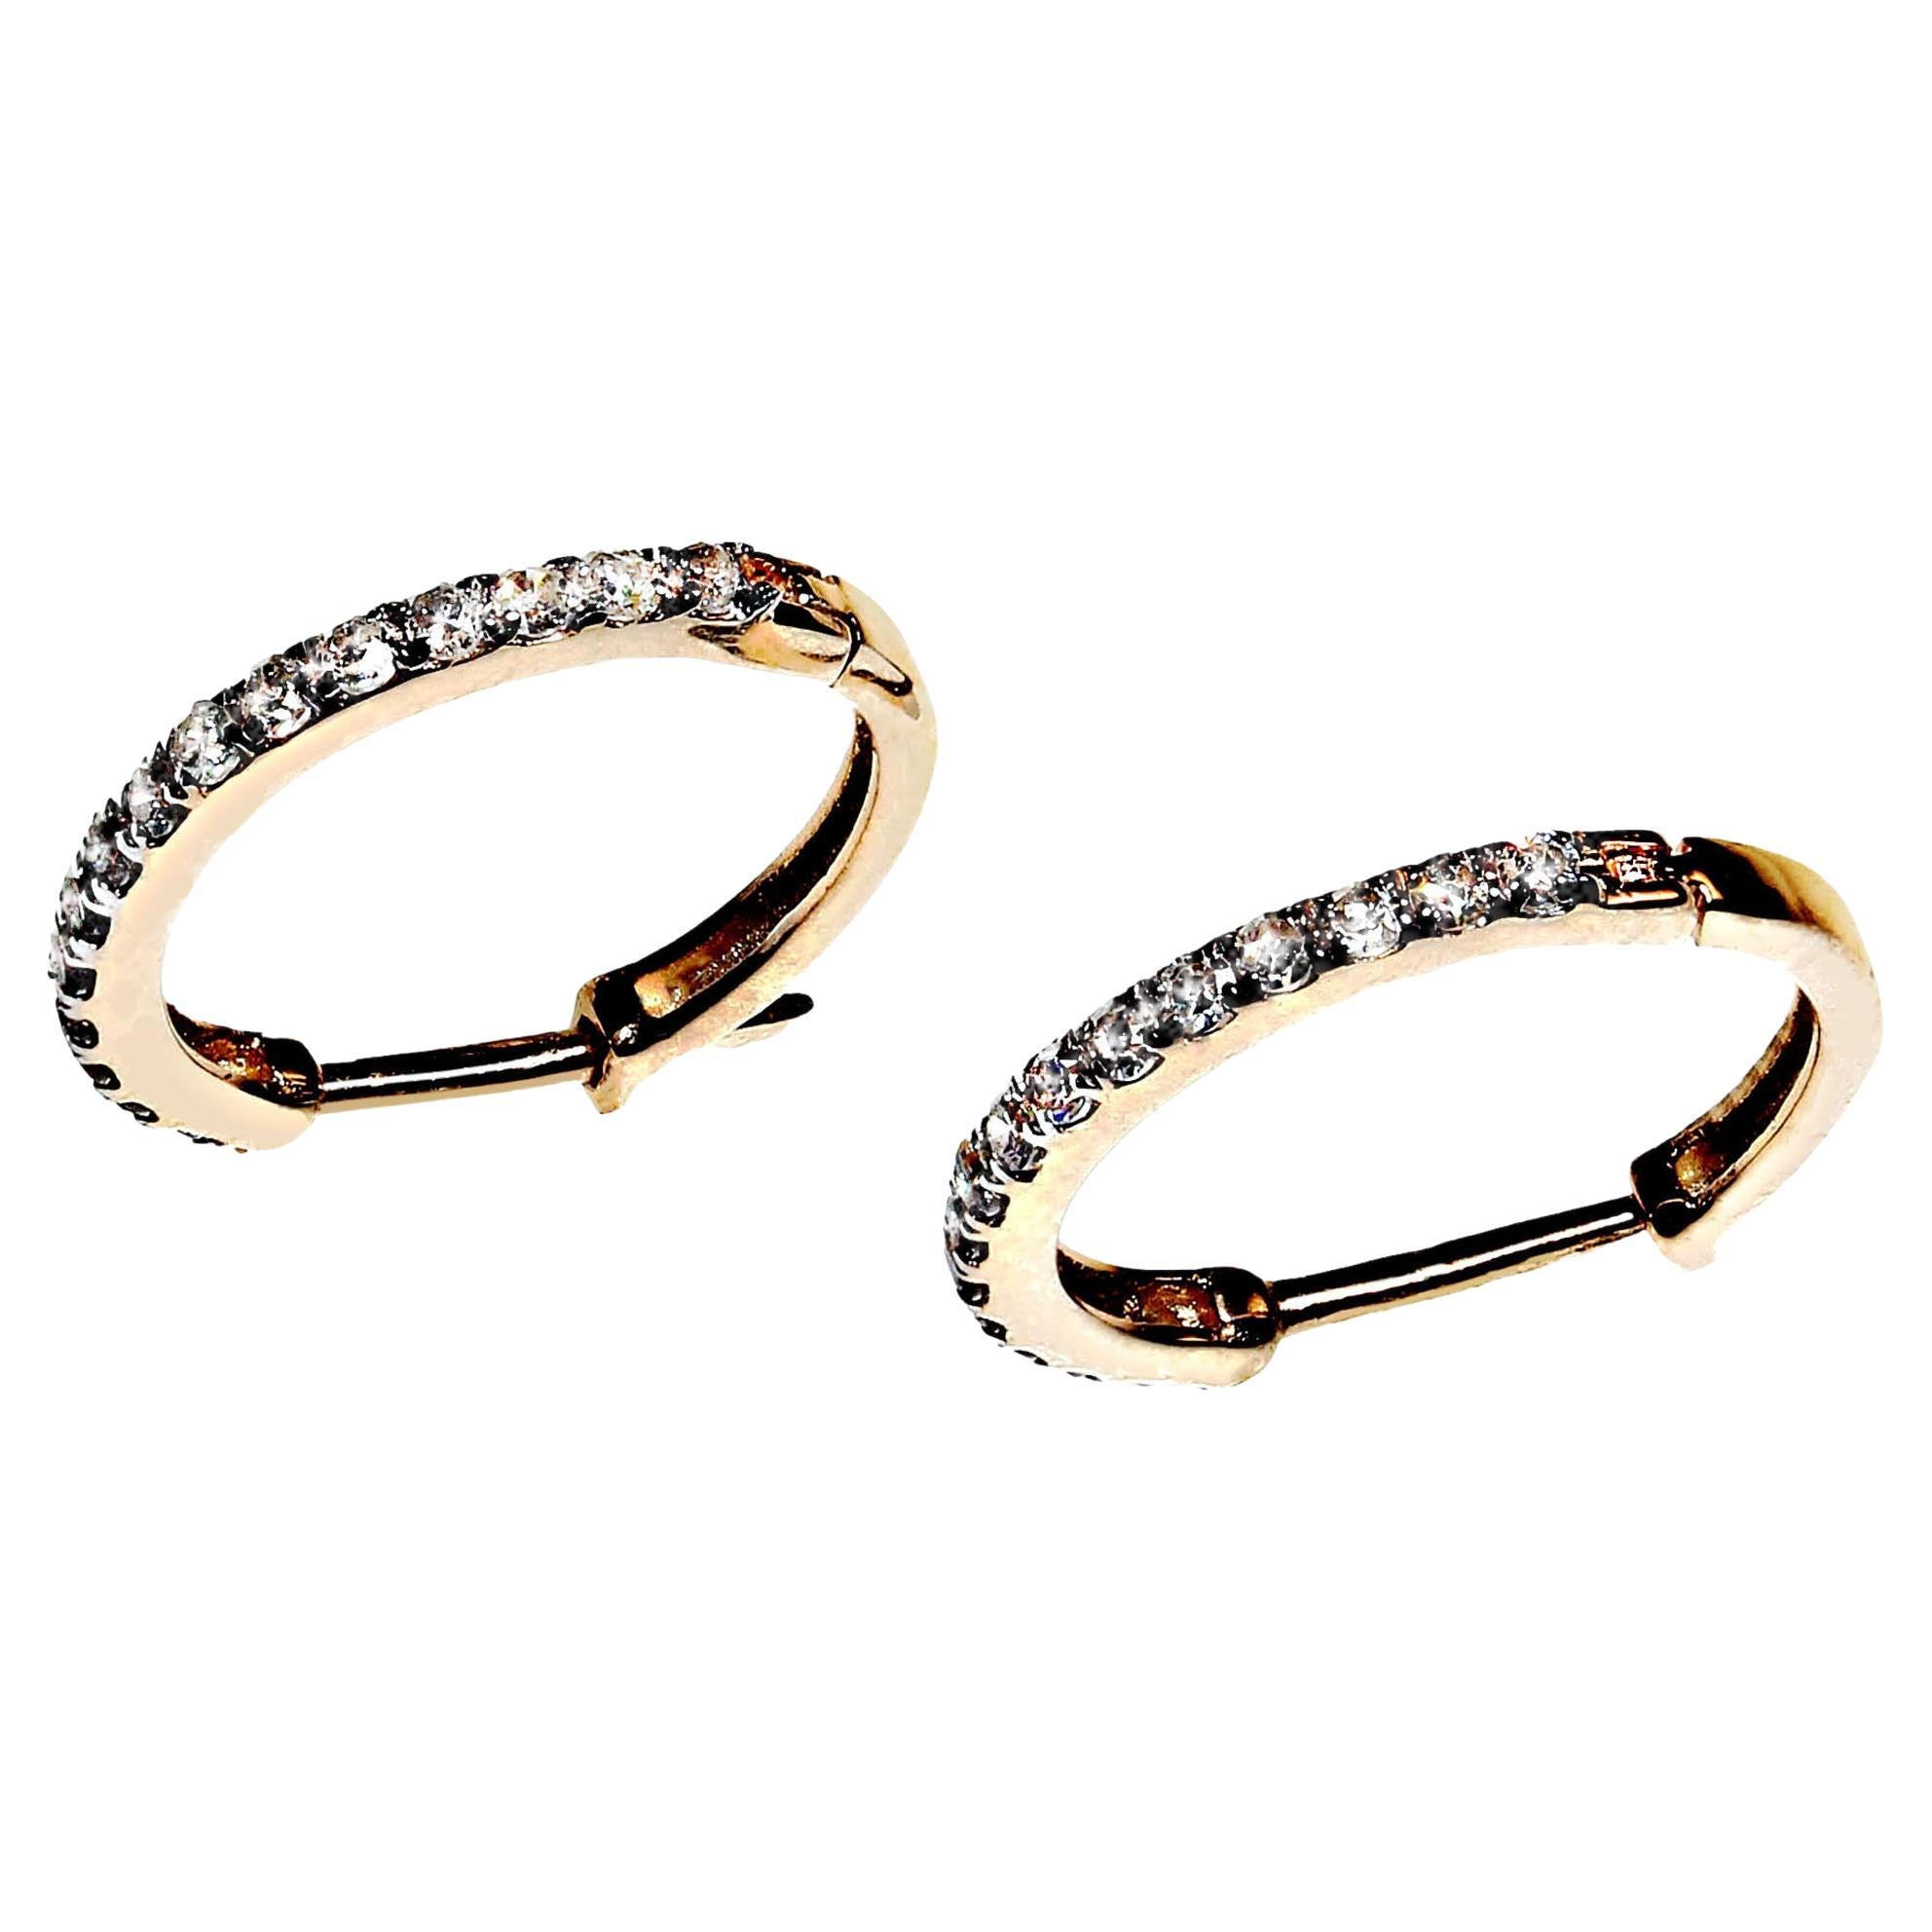 Classic, delicate Diamond and 14KT rich yellow gold one half inch hoop earrings. These classics are what the sparklers that everyone wants to wear.  They feature 0.17 carats of diamonds and 0.893 grams of 14KT yellow gold. They are hinged and have a